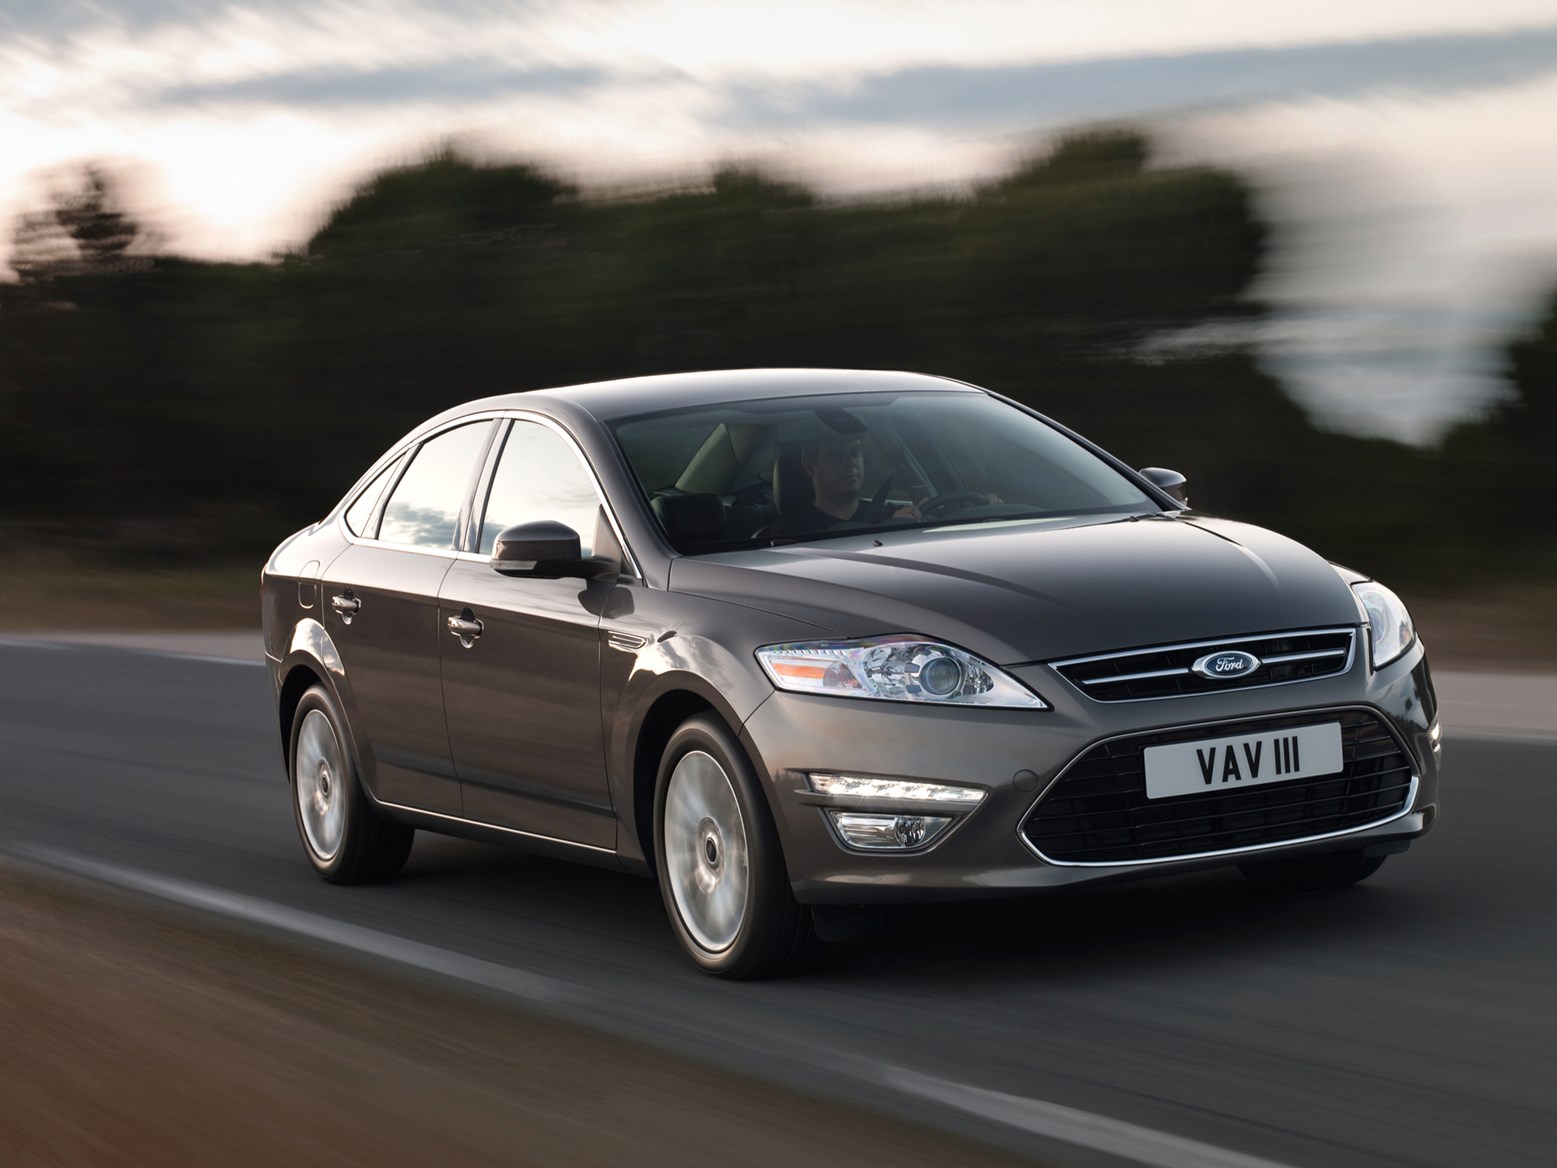 Used Ford Mondeo Saloon (2007 - 2010) Review | Parkers